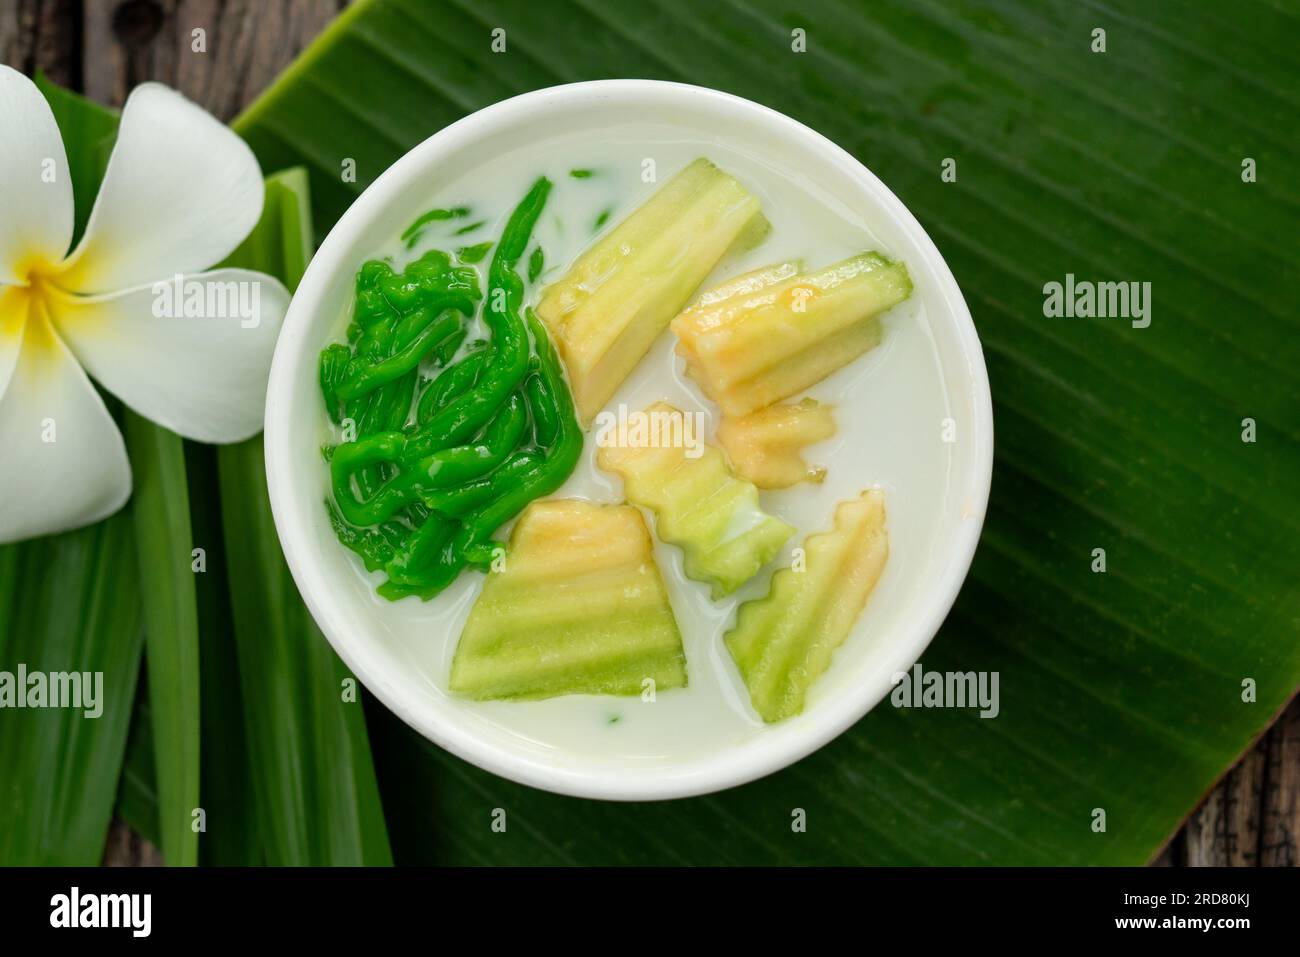 Top view of Thai dessert with pandan leaf followed by green banana leaves on the wood background. Stock Photo